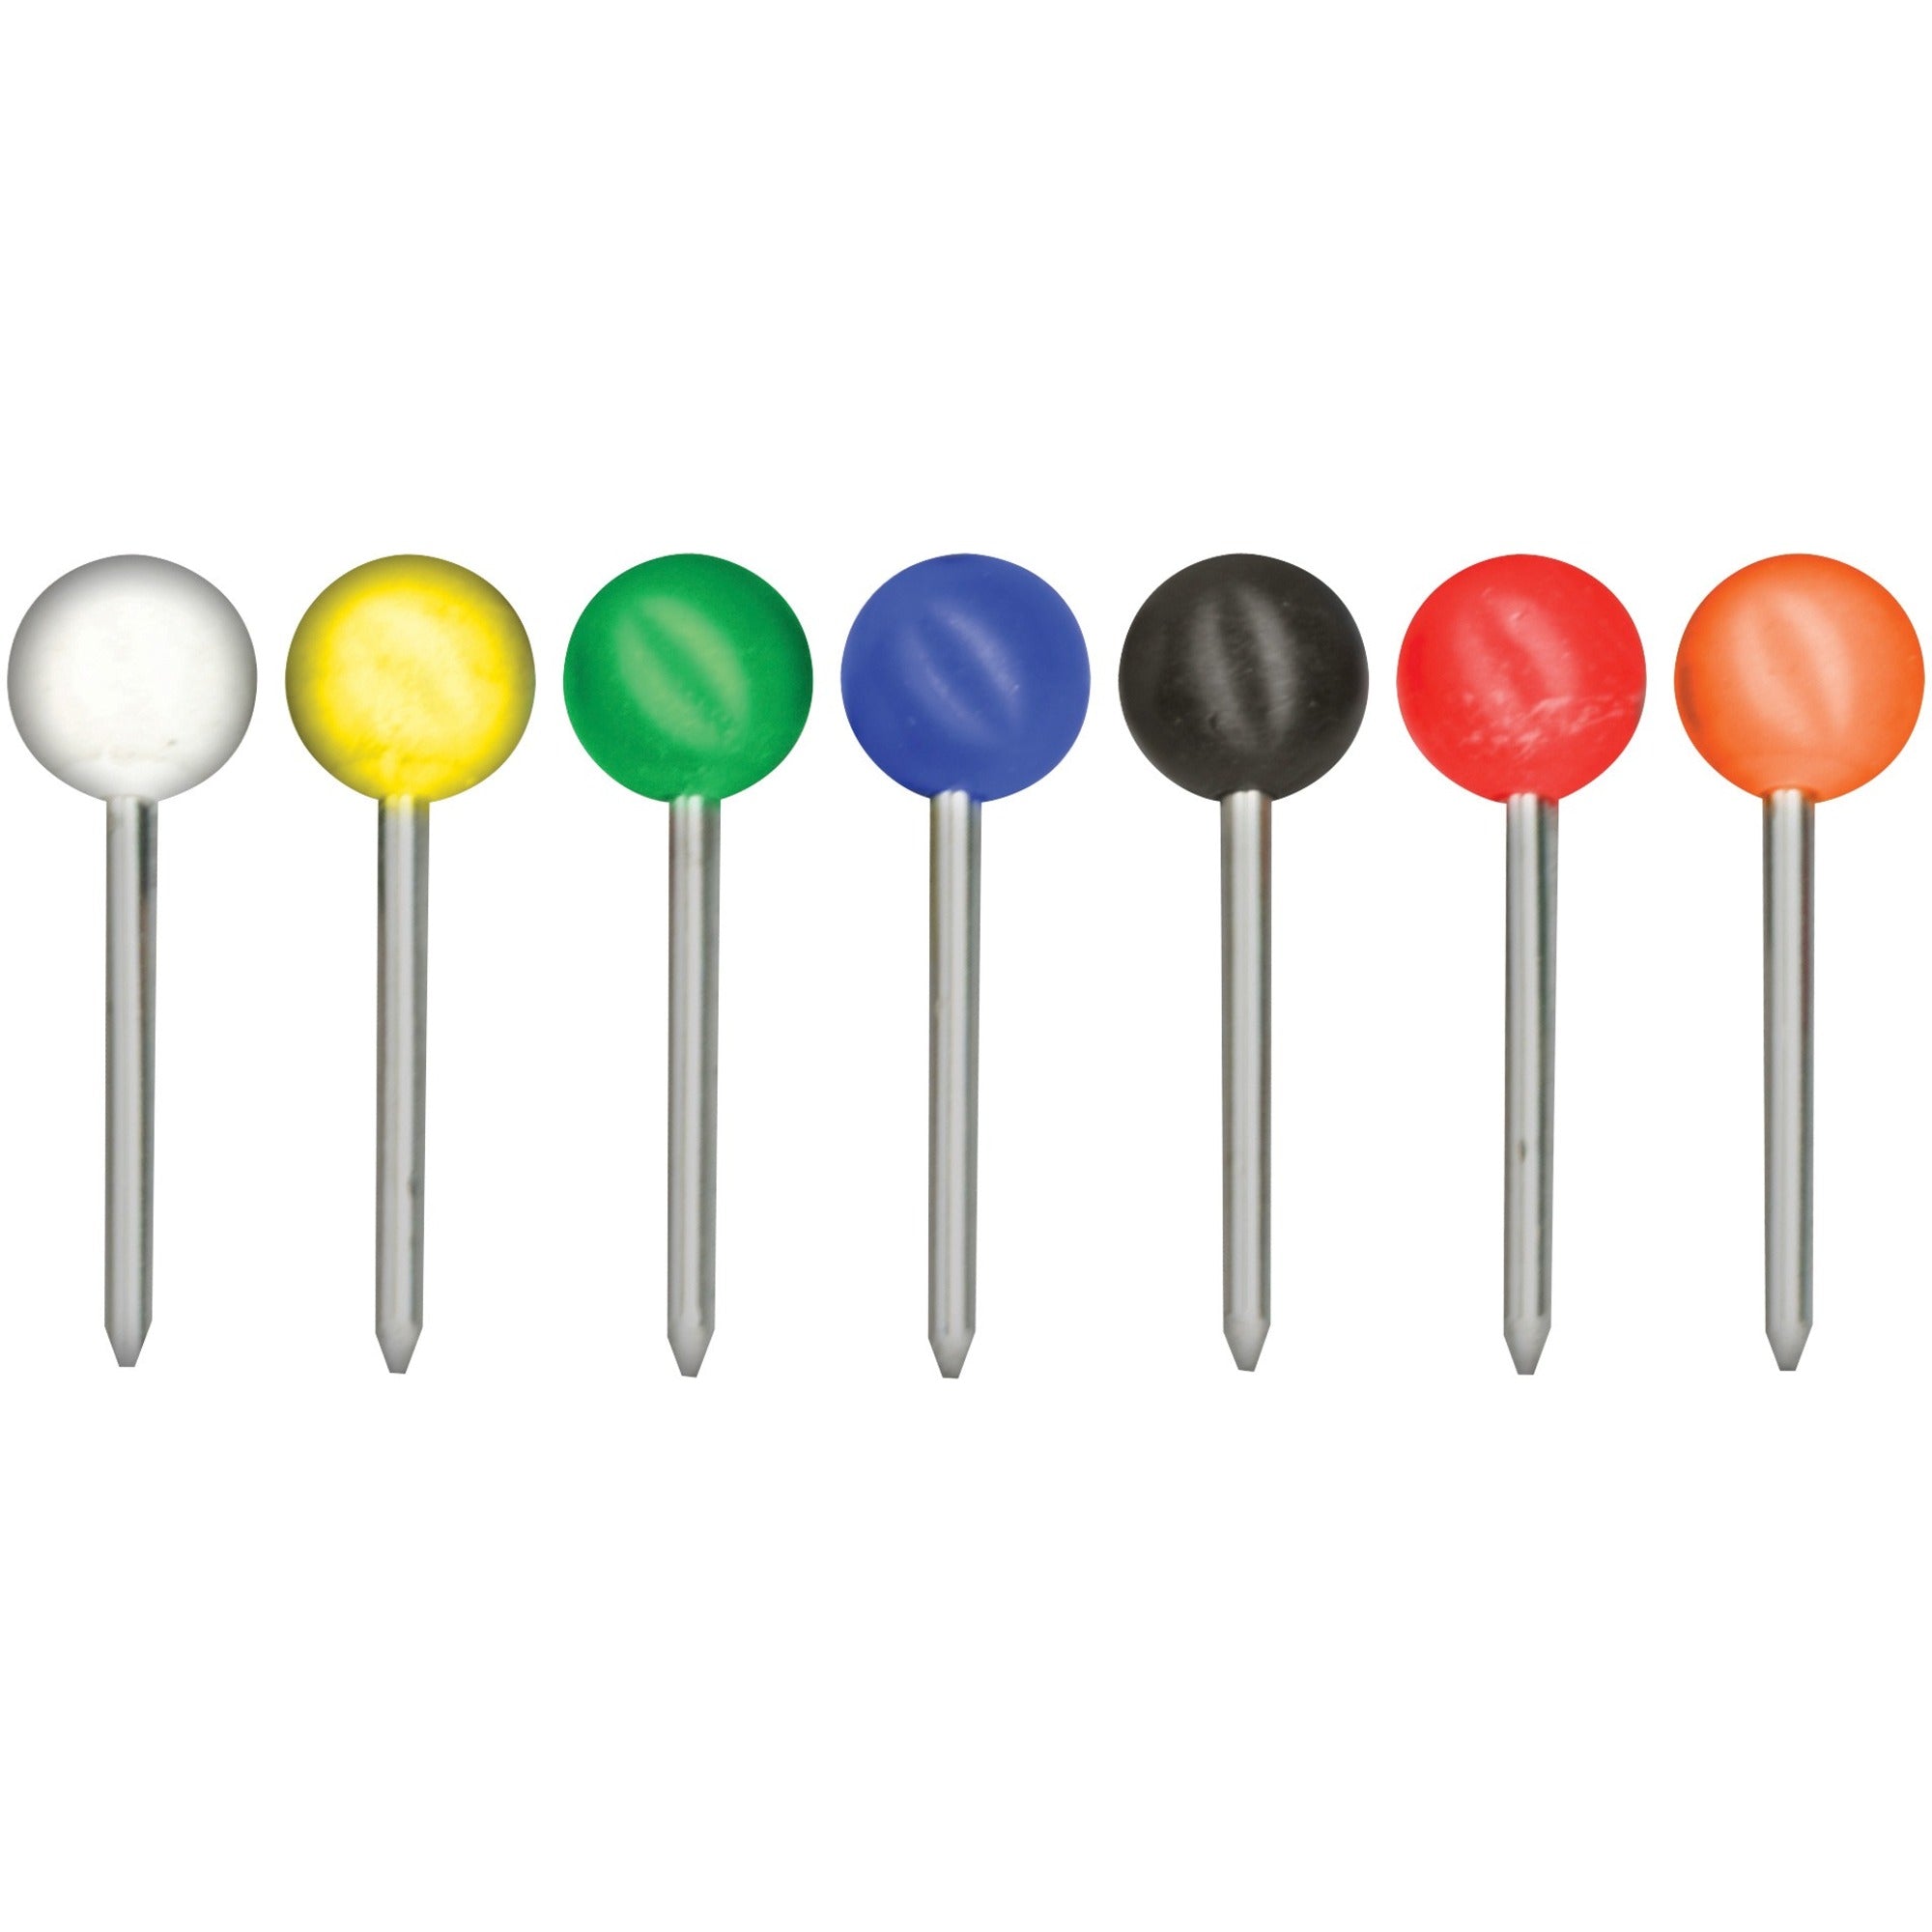 Gem Office Products Round Head Map Tacks - 0.18" Head - 0.4" Length - 250 / Box - Assorted - 